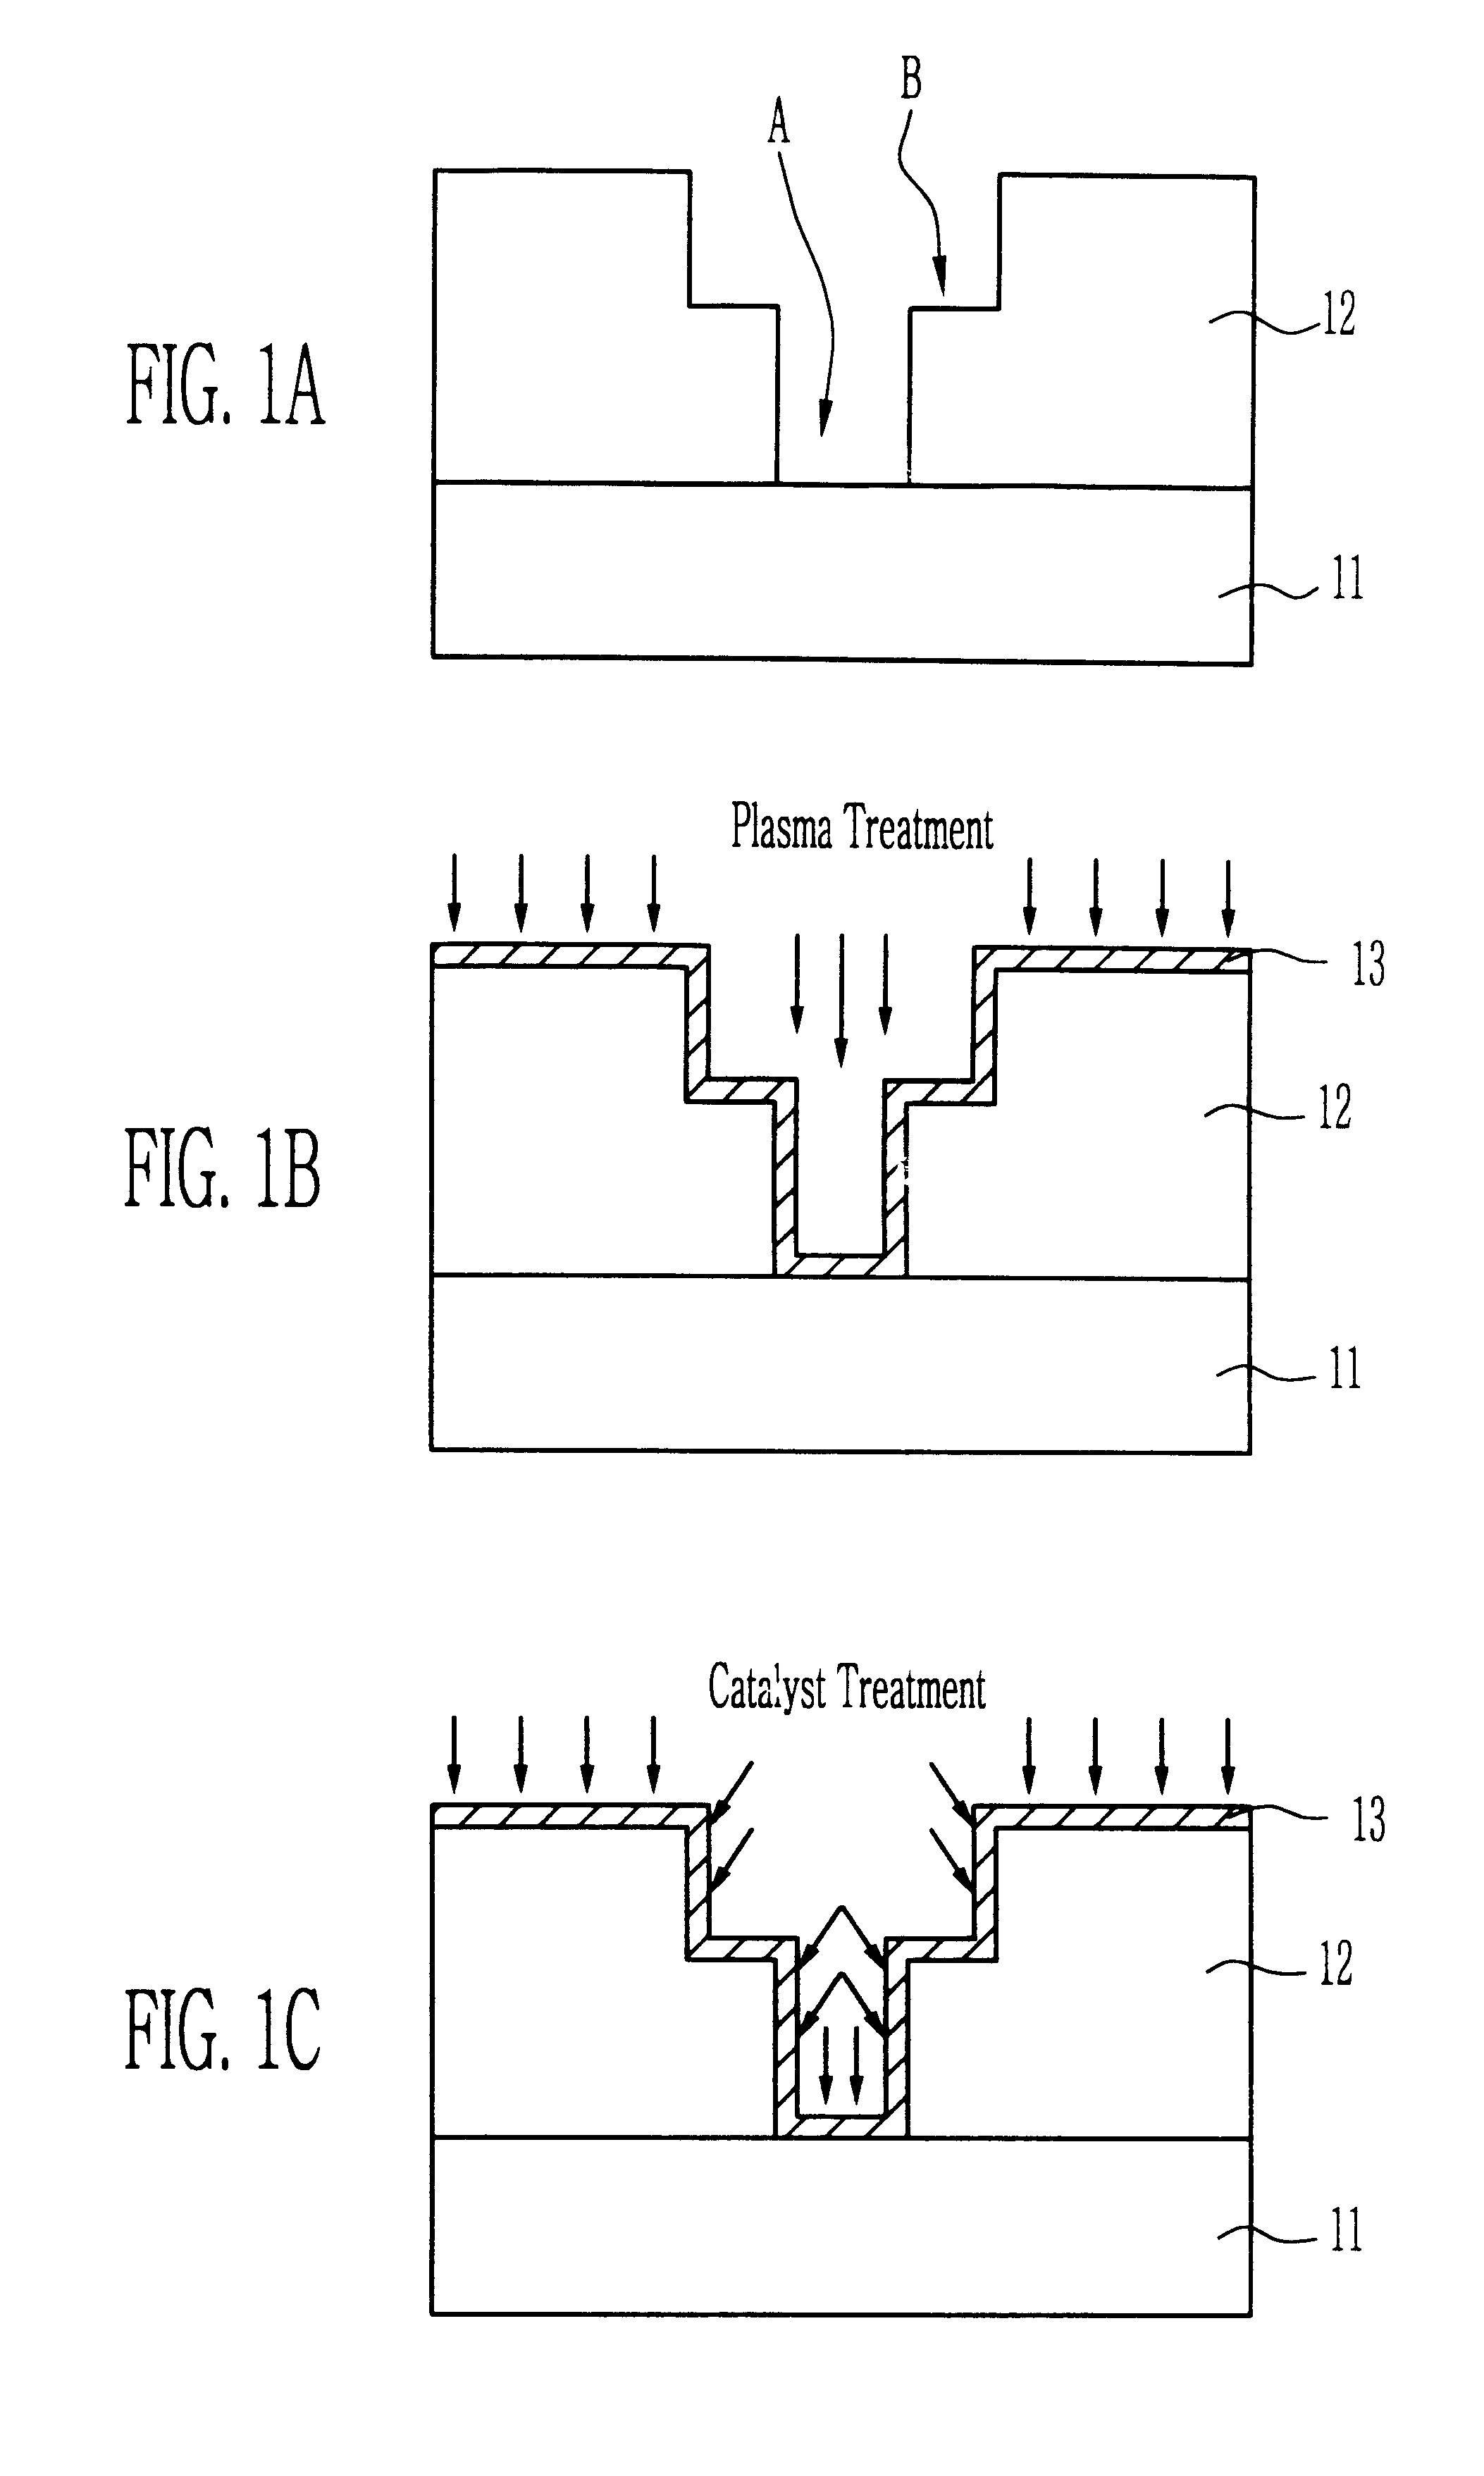 Method of catalyzing copper deposition in a damascene structure by plasma treating the barrier layer and then applying a catalyst such as iodine or iodine compounds to the barrier layer